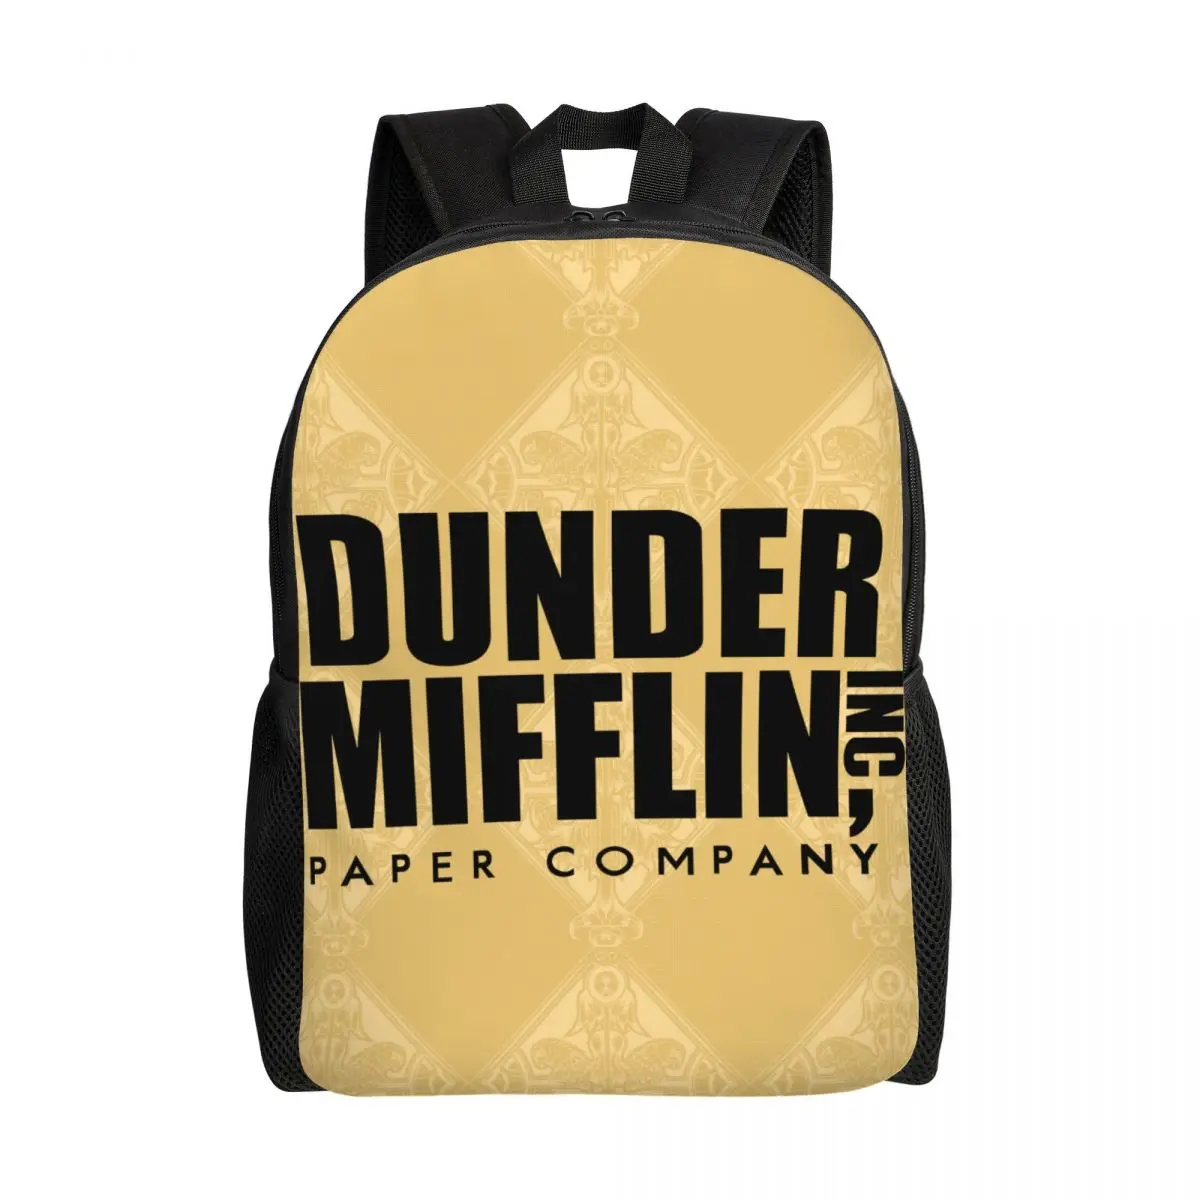 

Dunder Mifflin Paper Company Travel Backpack Men Women School Computer Bookbag The Office TV Show College Student Daypack Bags